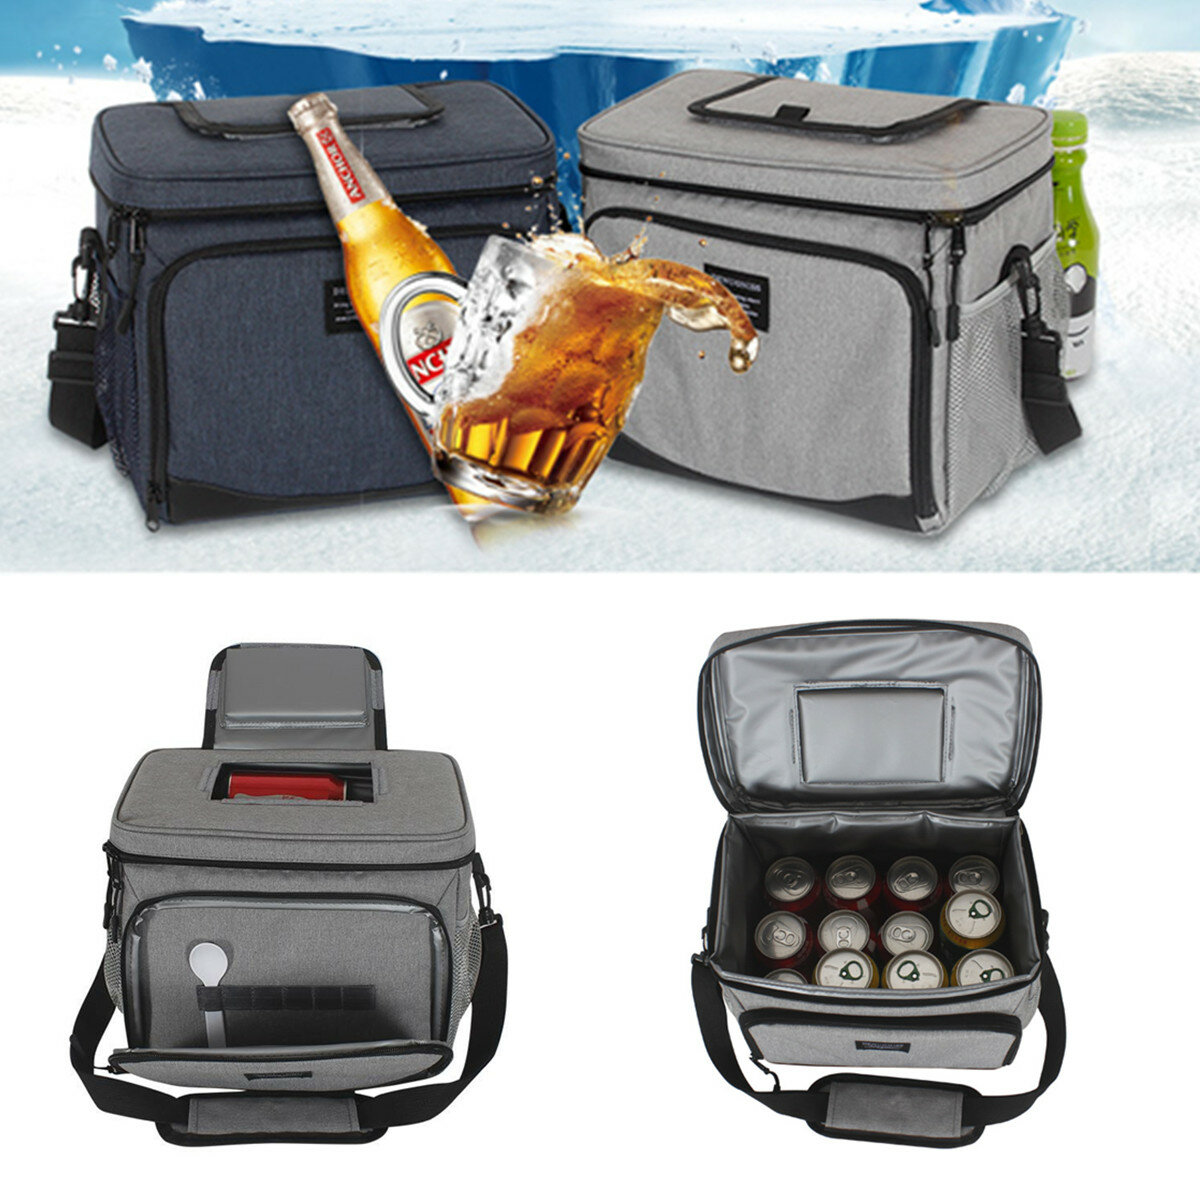 15L Outdoor Picnic Thermal Insulated Cooler Bag Lunch Food Box Container Storage Bag